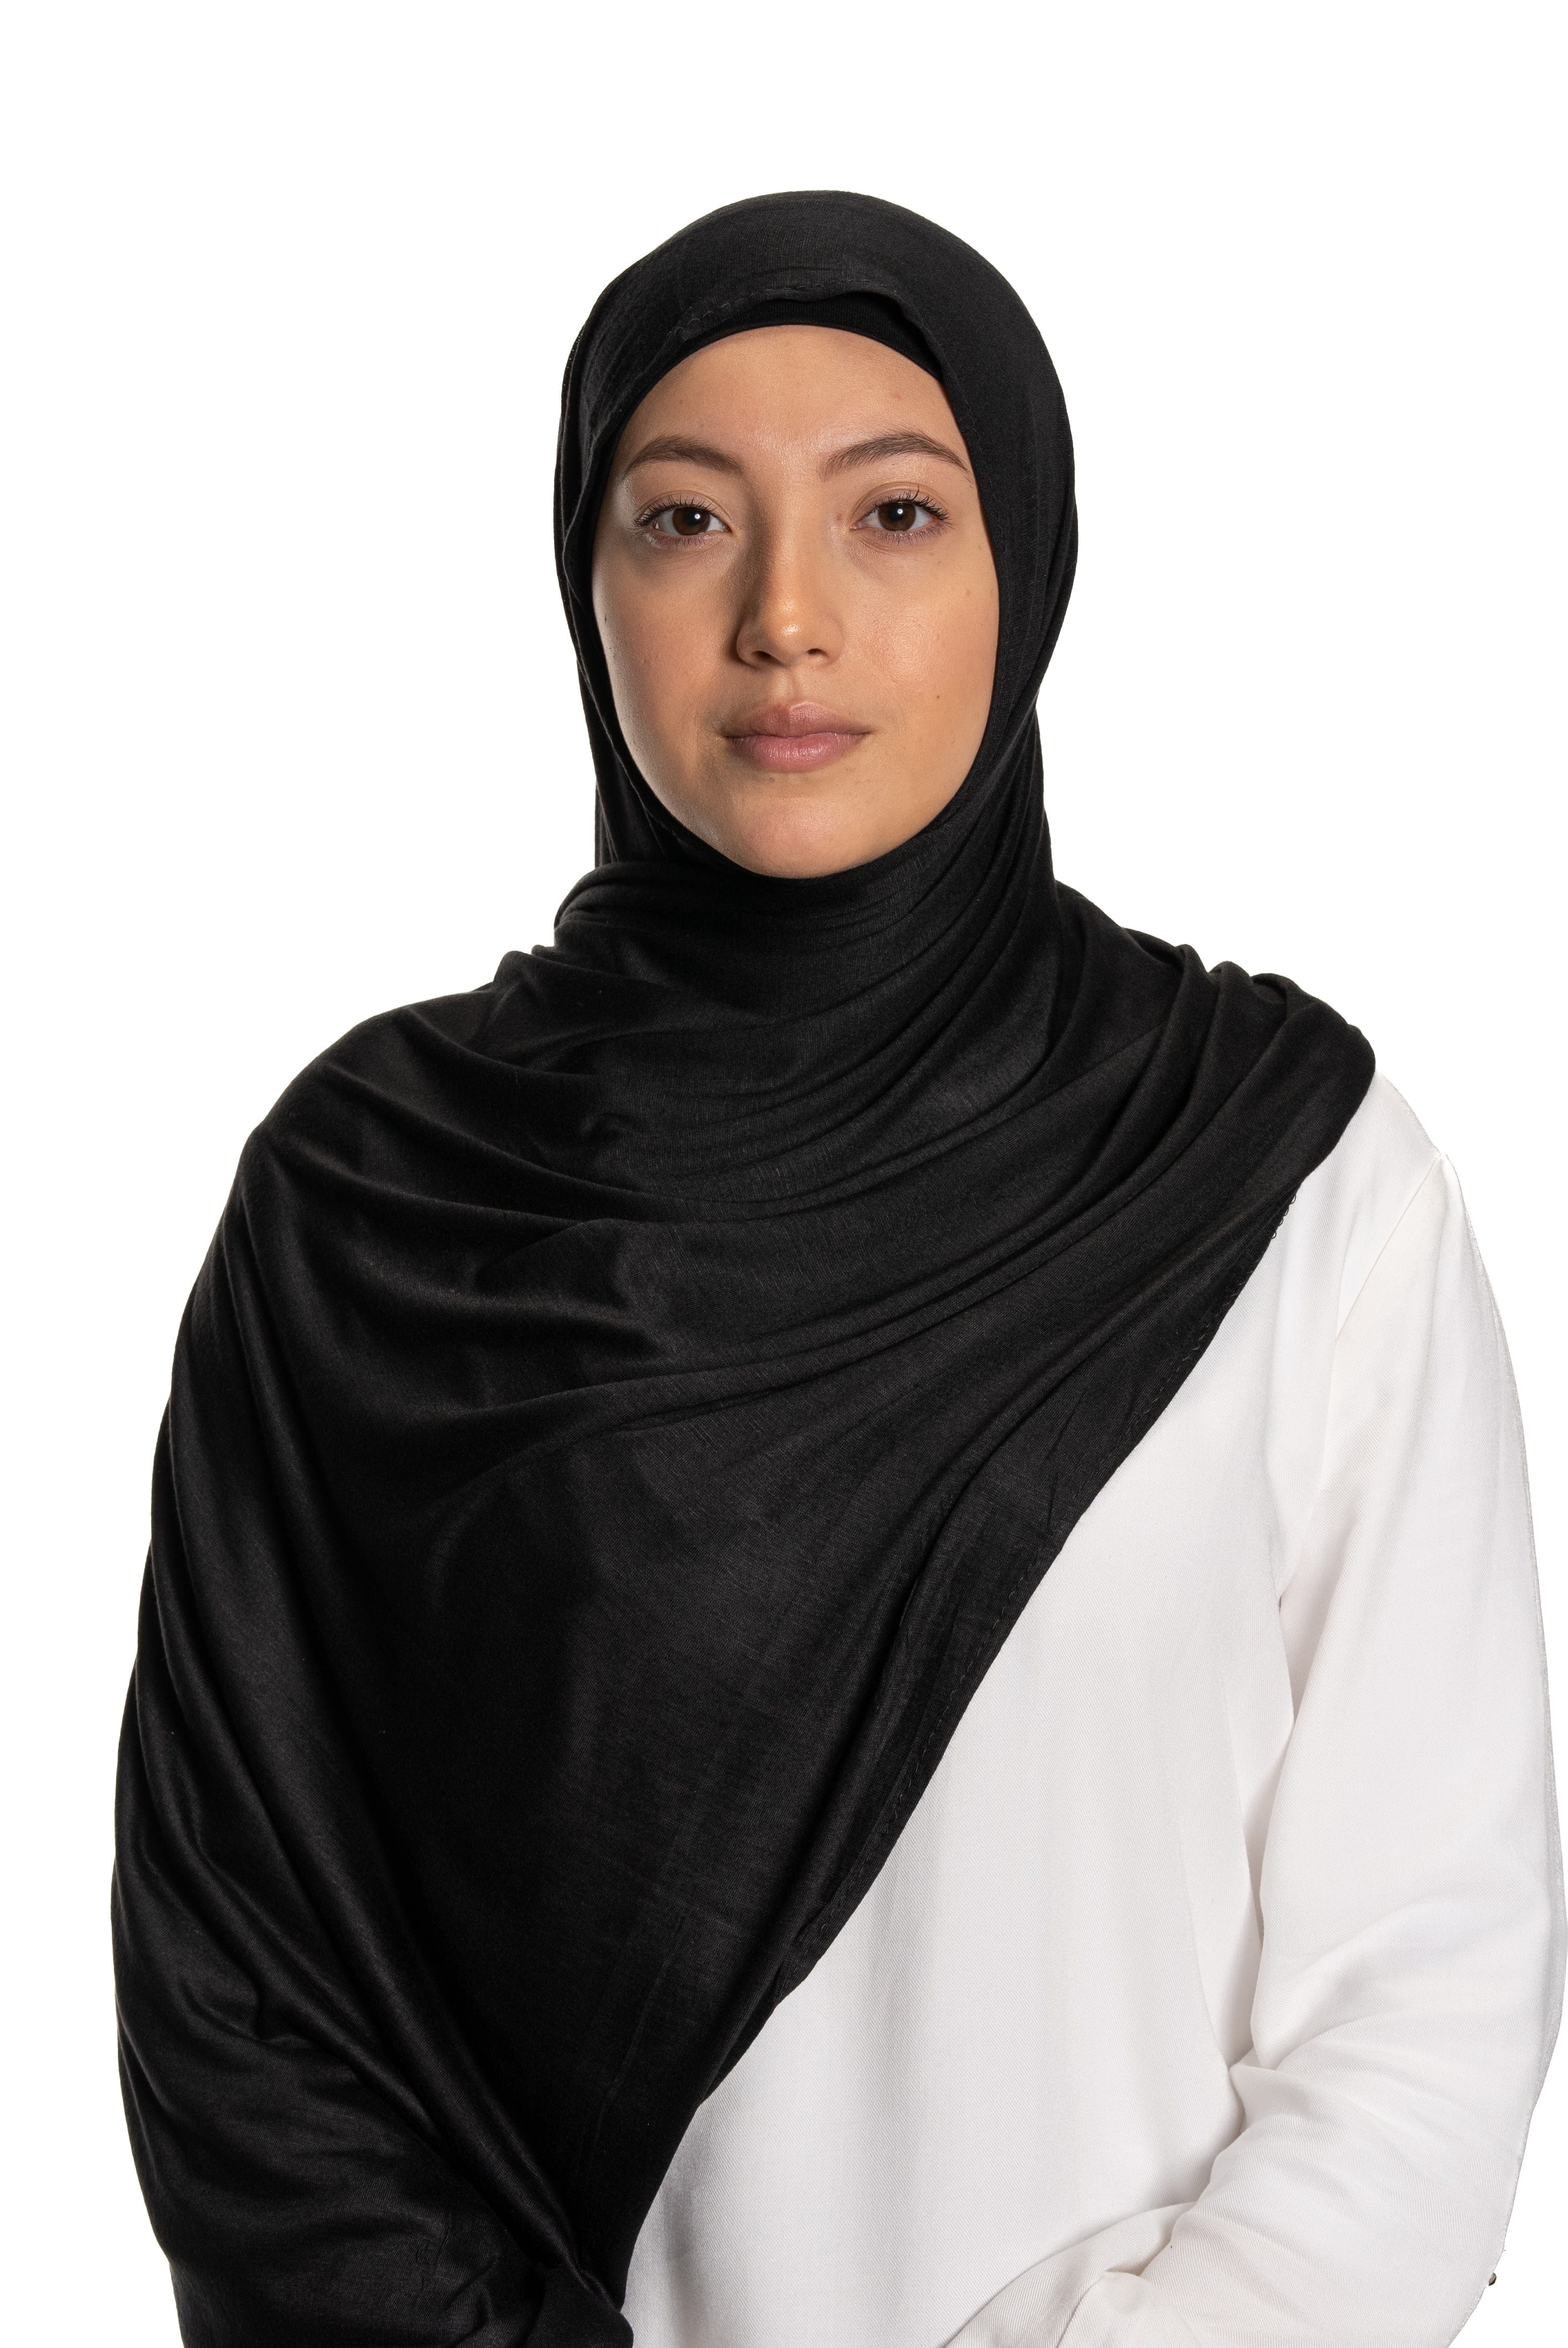 Jolie Nisa Hijab Black Premium Slip-on Jersey Instant Head Scarf Wrap for Effortless and Stylish Hijab Wear Premium Slip-on instant Jersey Head Scarf Wrap for Effortless and Stylish Hijab Wear!